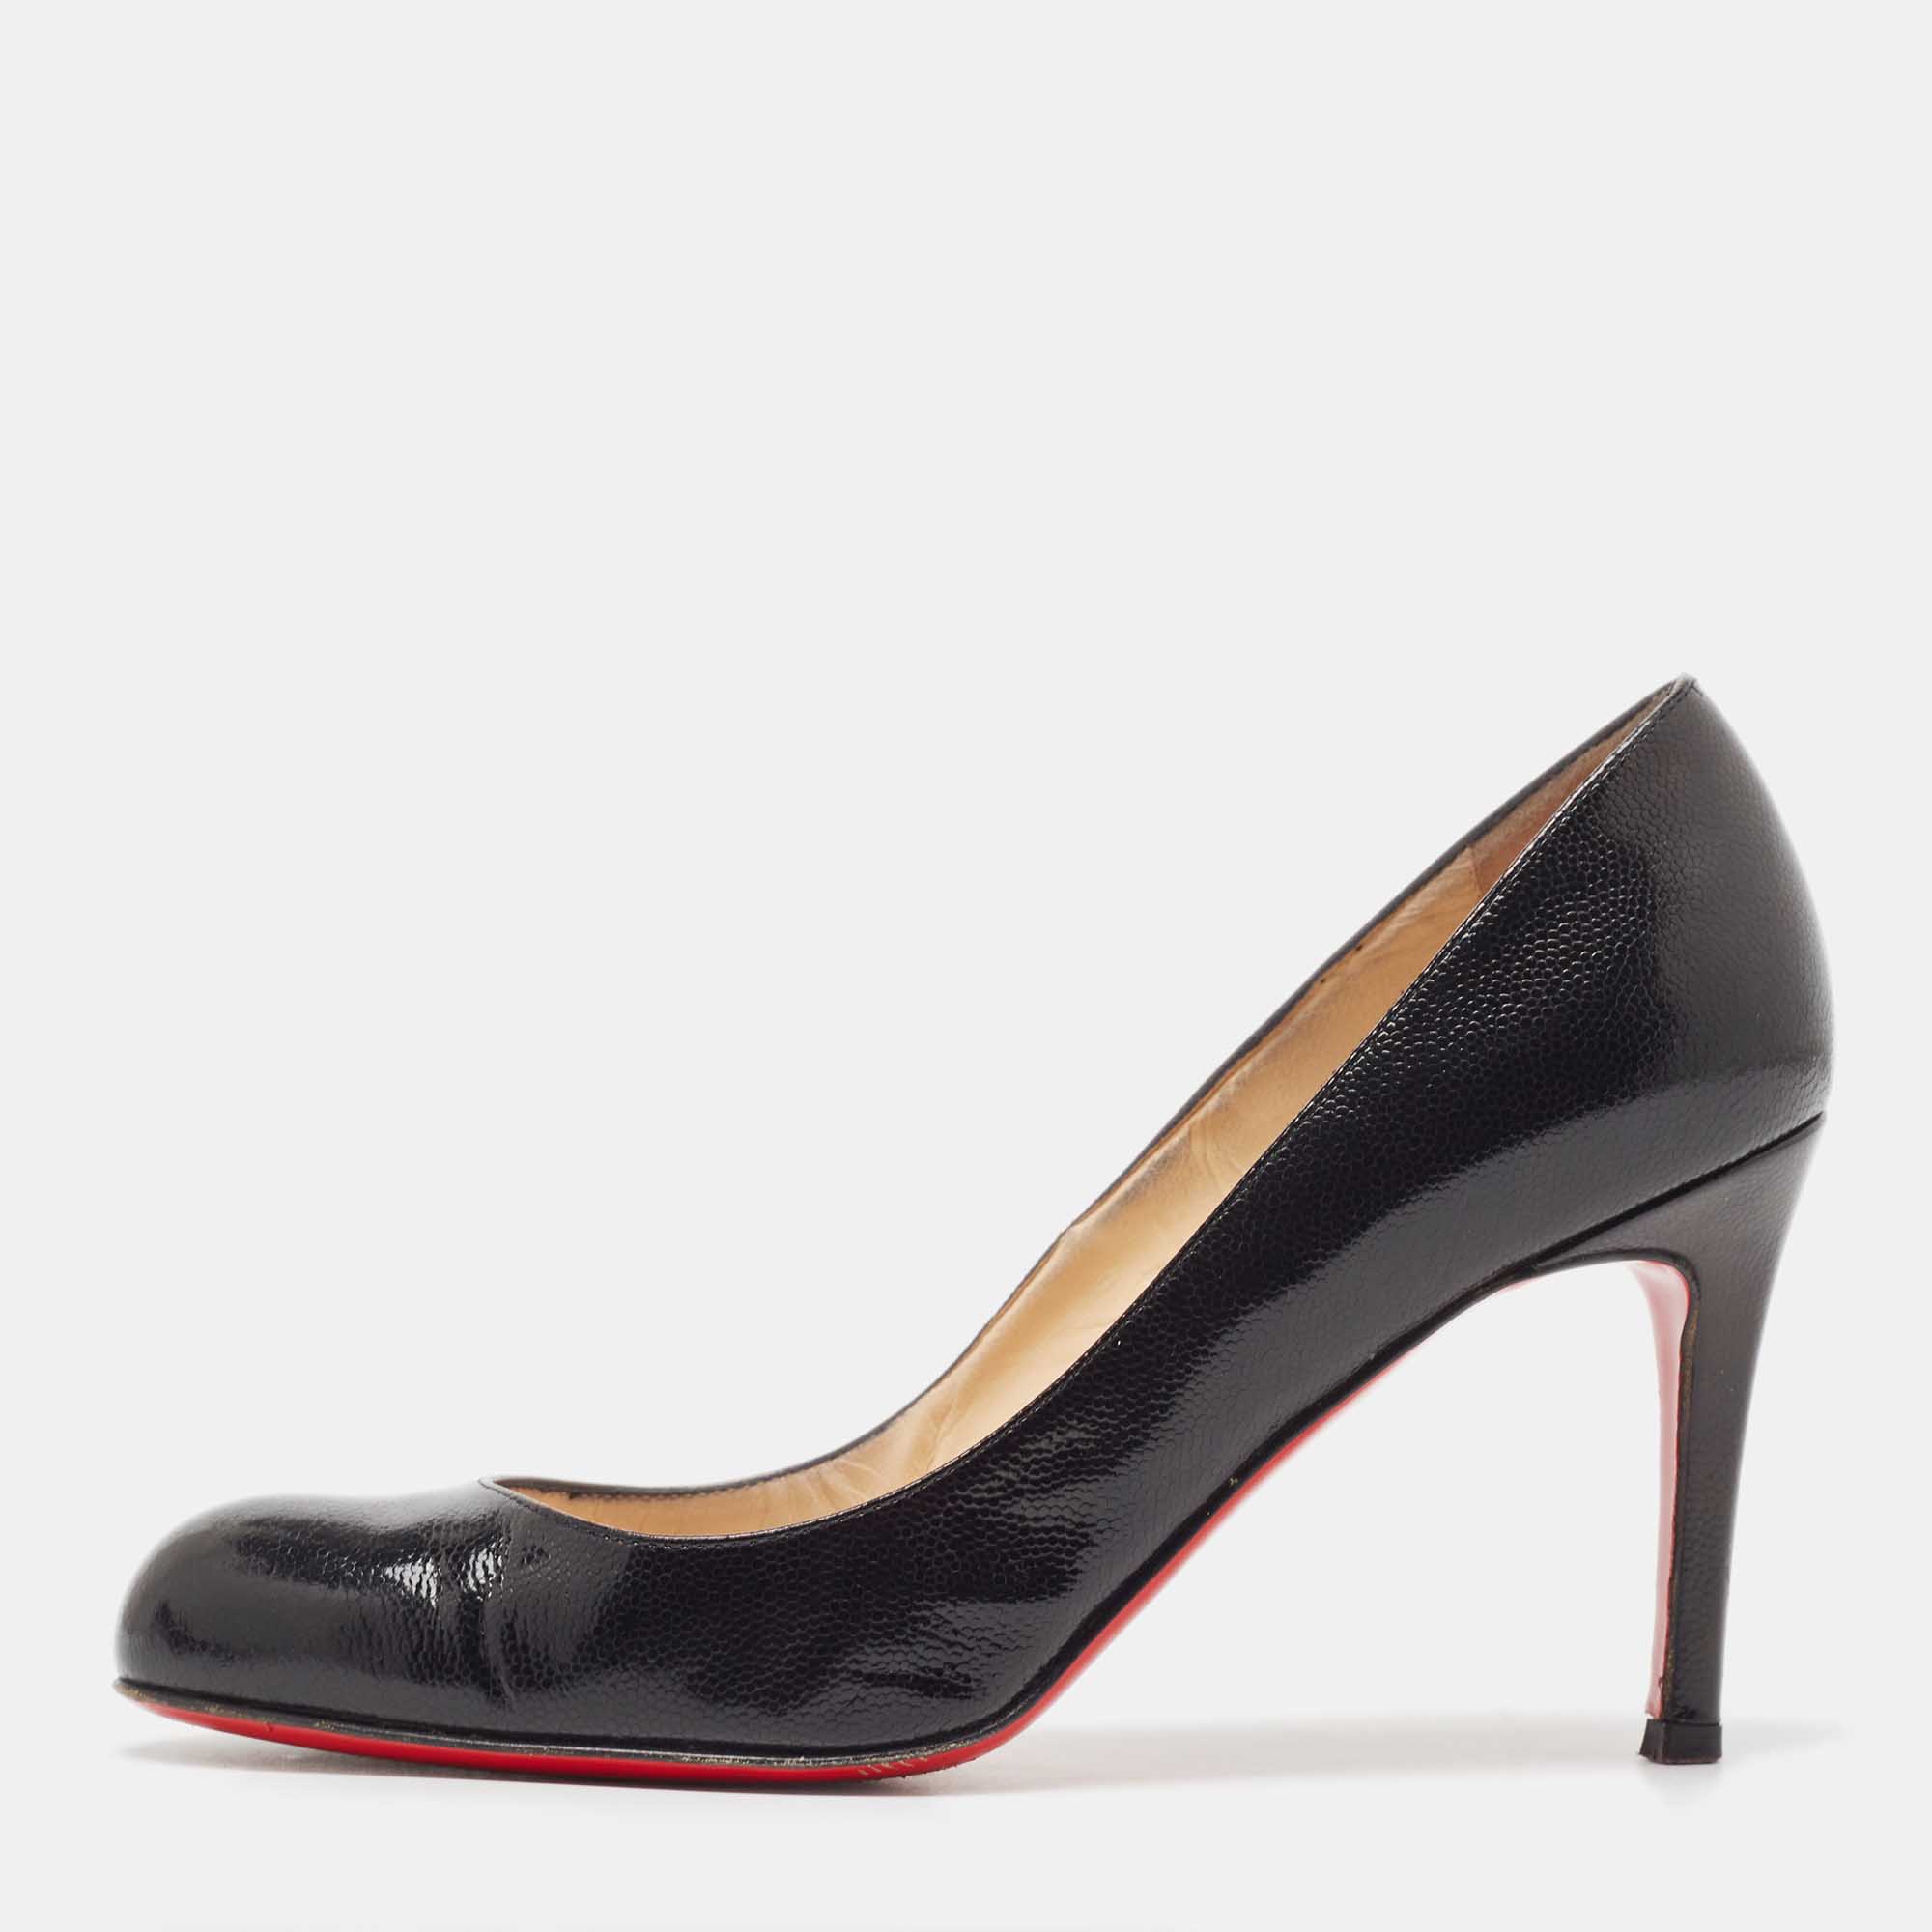 Christian Louboutin Black Grained Leather Simple Pumps Size 37